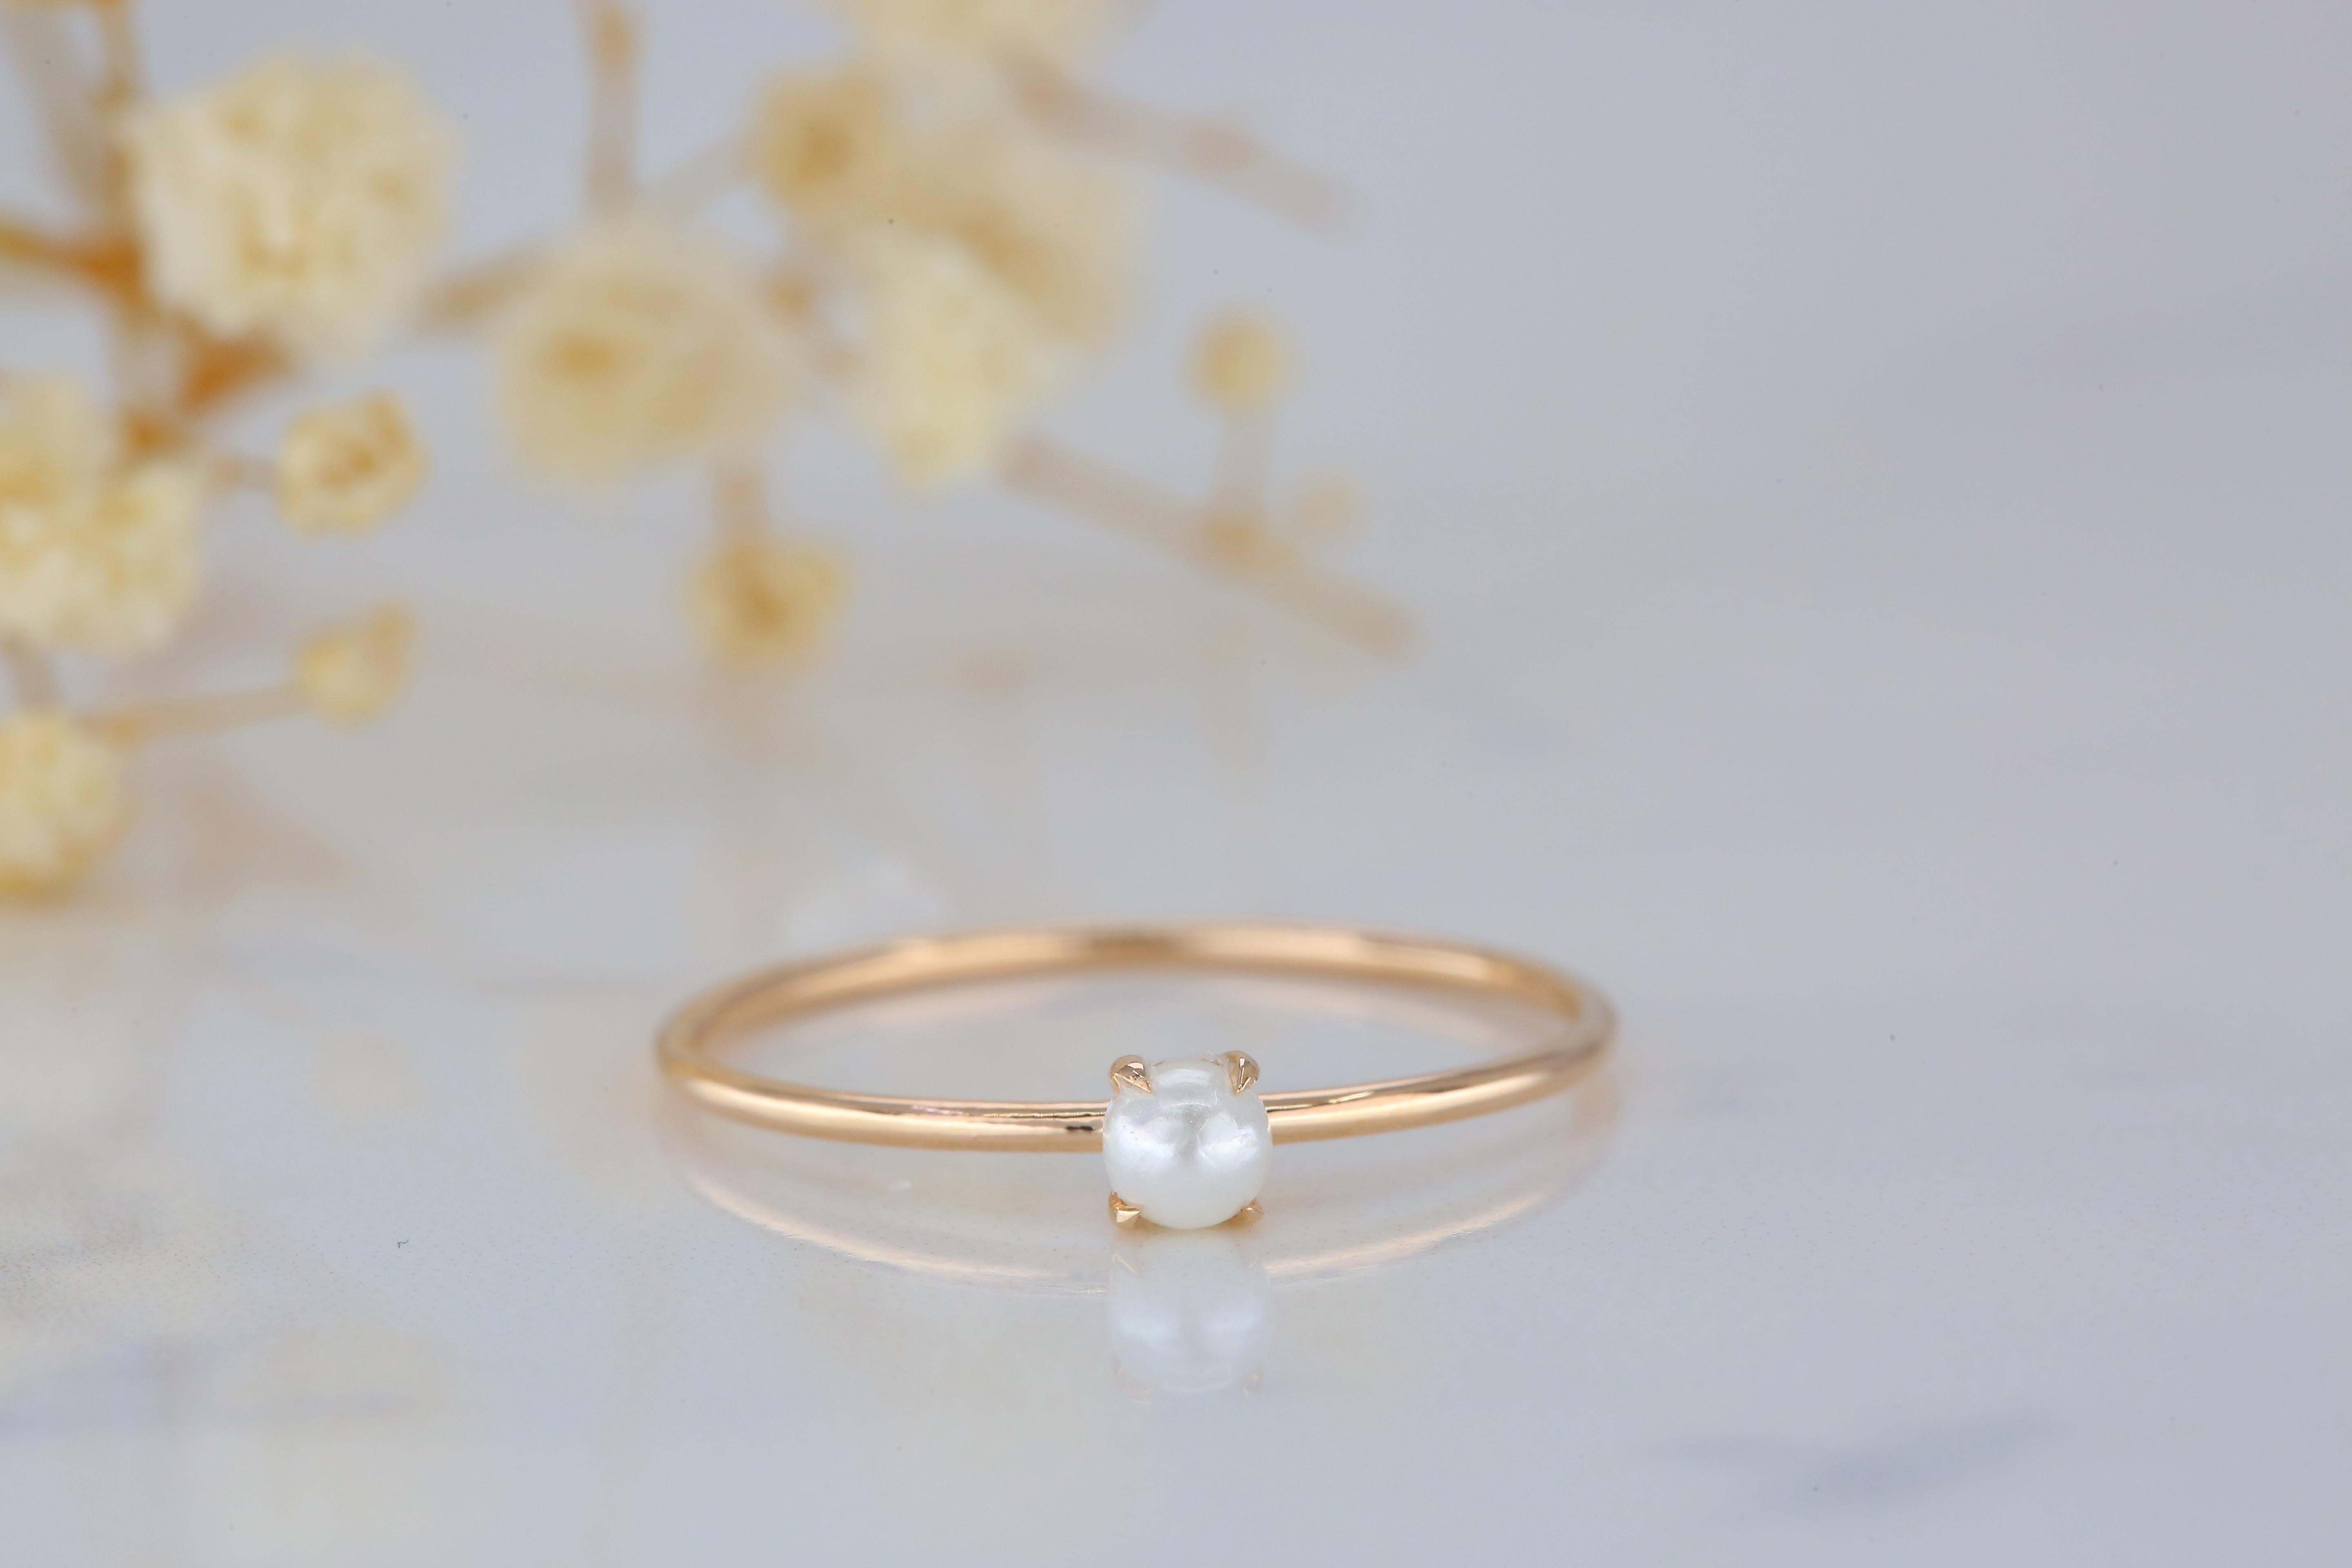 For Sale:  14K Gold Pearl Ring, 14K Gold Solitaire Pearl Ring 5